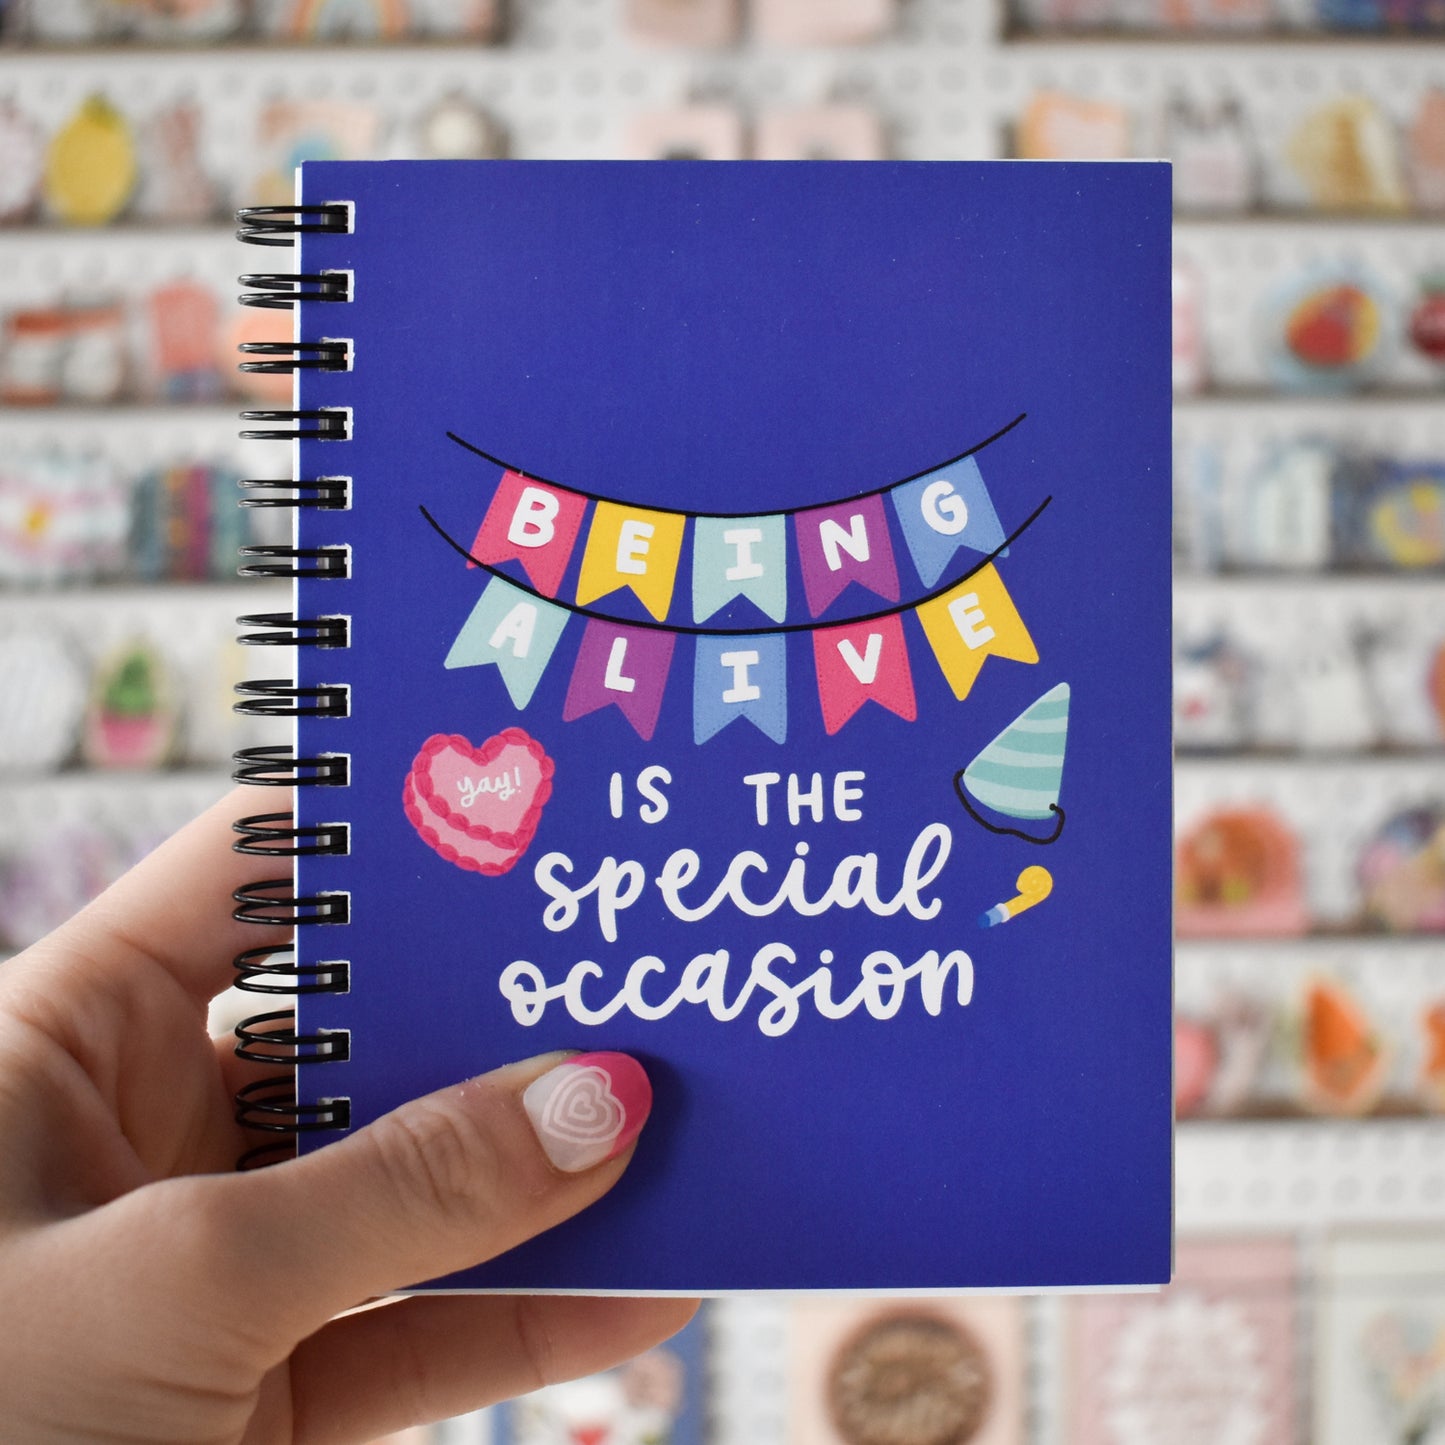 Being Alive is the Special Occasion Gratitude Journal